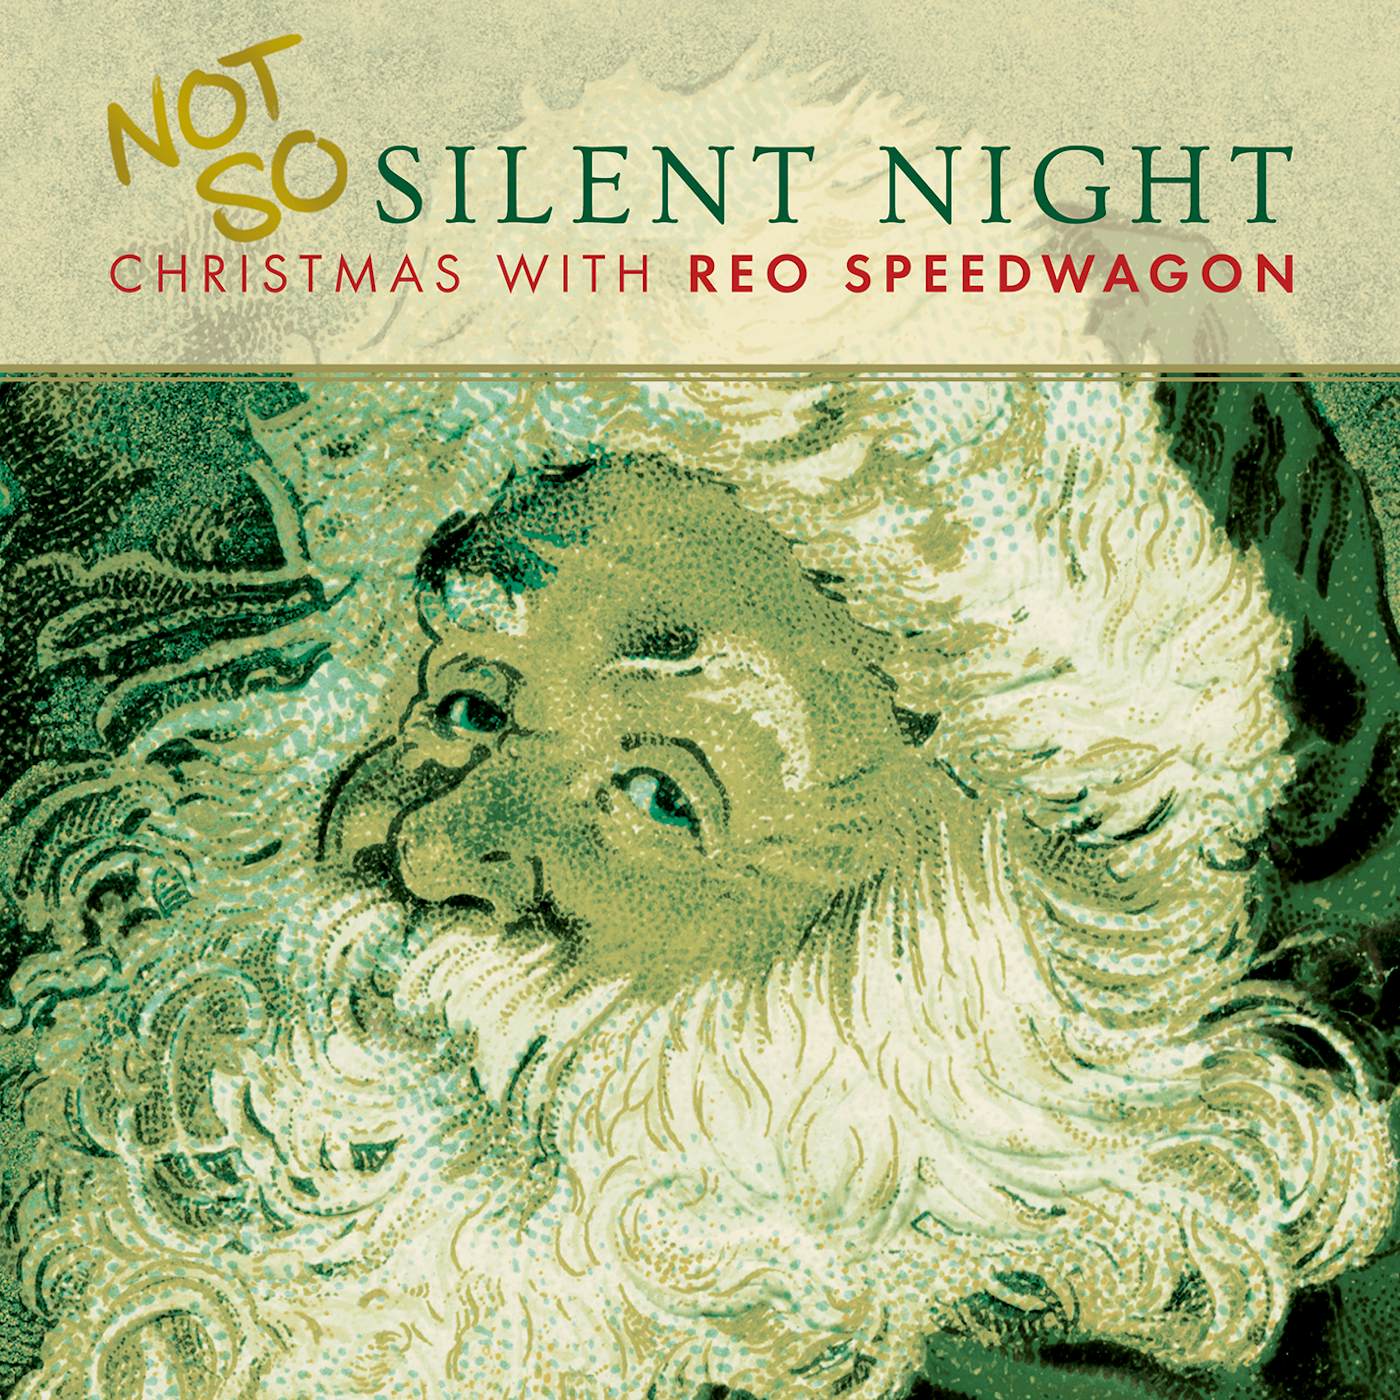 NOT SO SILENT - CHRISTMAS WITH REO SPEEDWAGON Vinyl Record